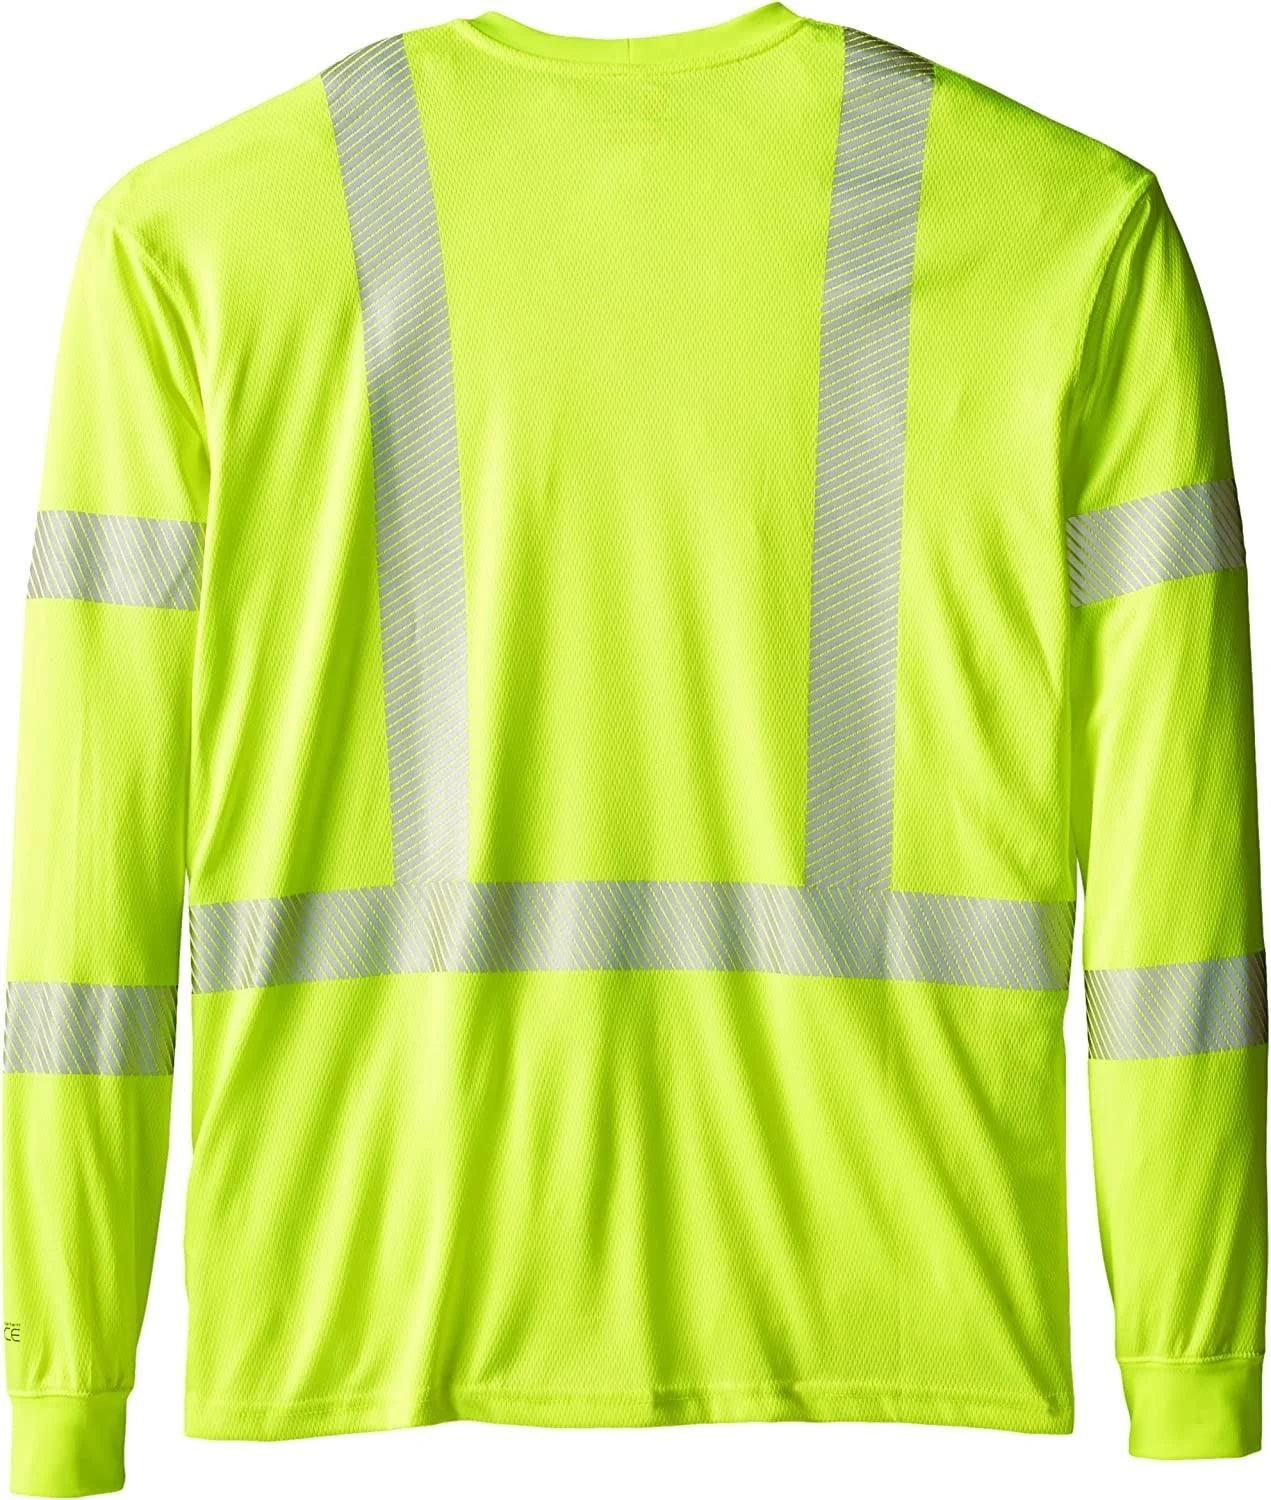 Class 3 High Visibility Force Long Sleeve T-Shirt - Brite Lime - Purpose-Built / Home of the Trades